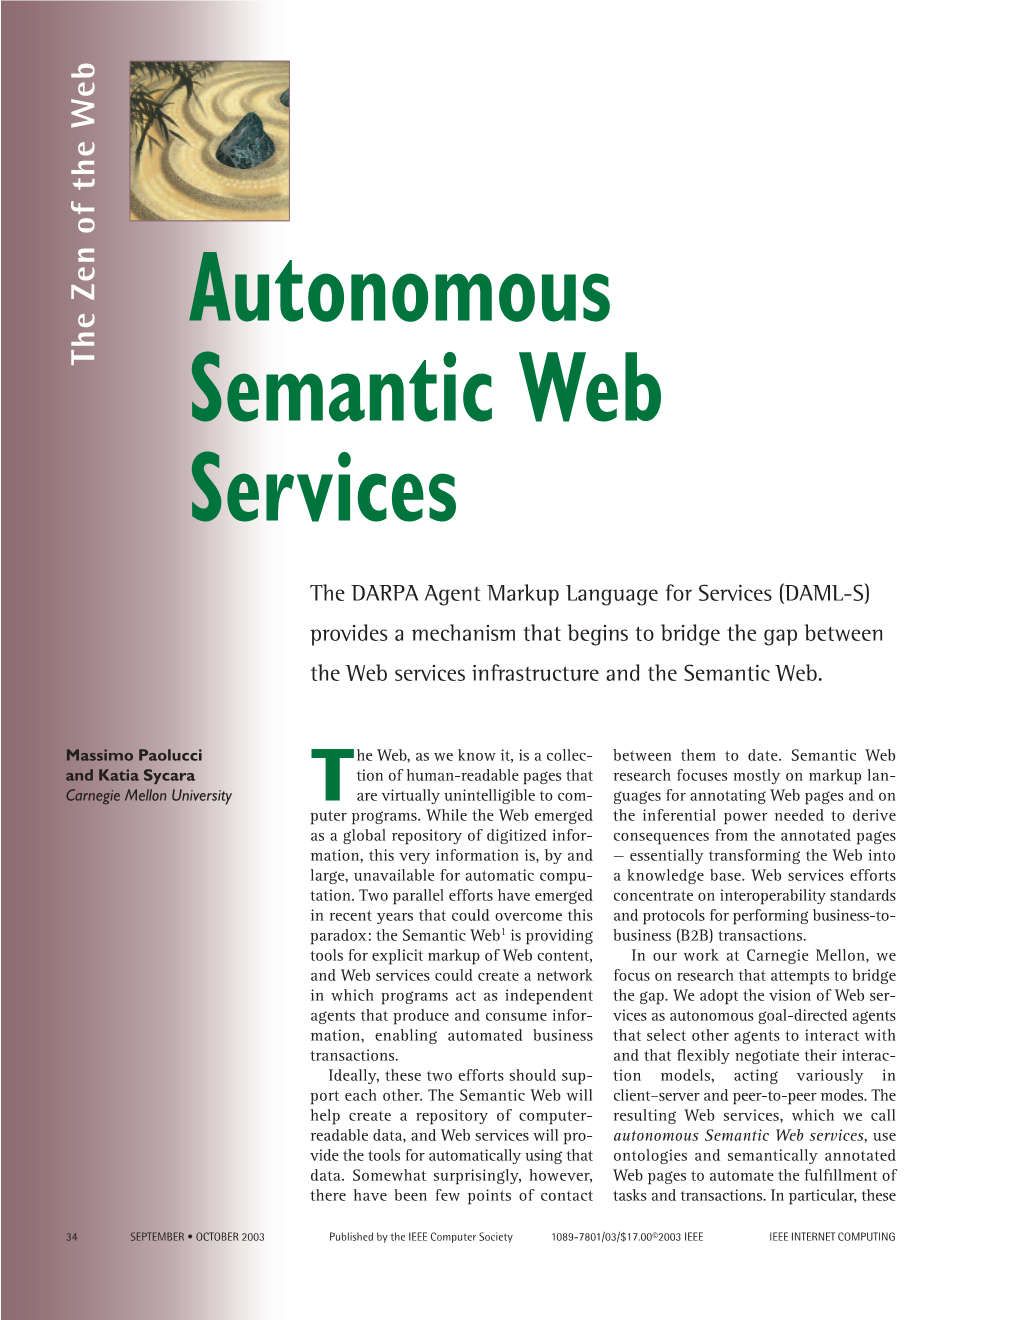 Autonomous Semantic Web Services, Use Vide the Tools for Automatically Using That Ontologies and Semantically Annotated Data